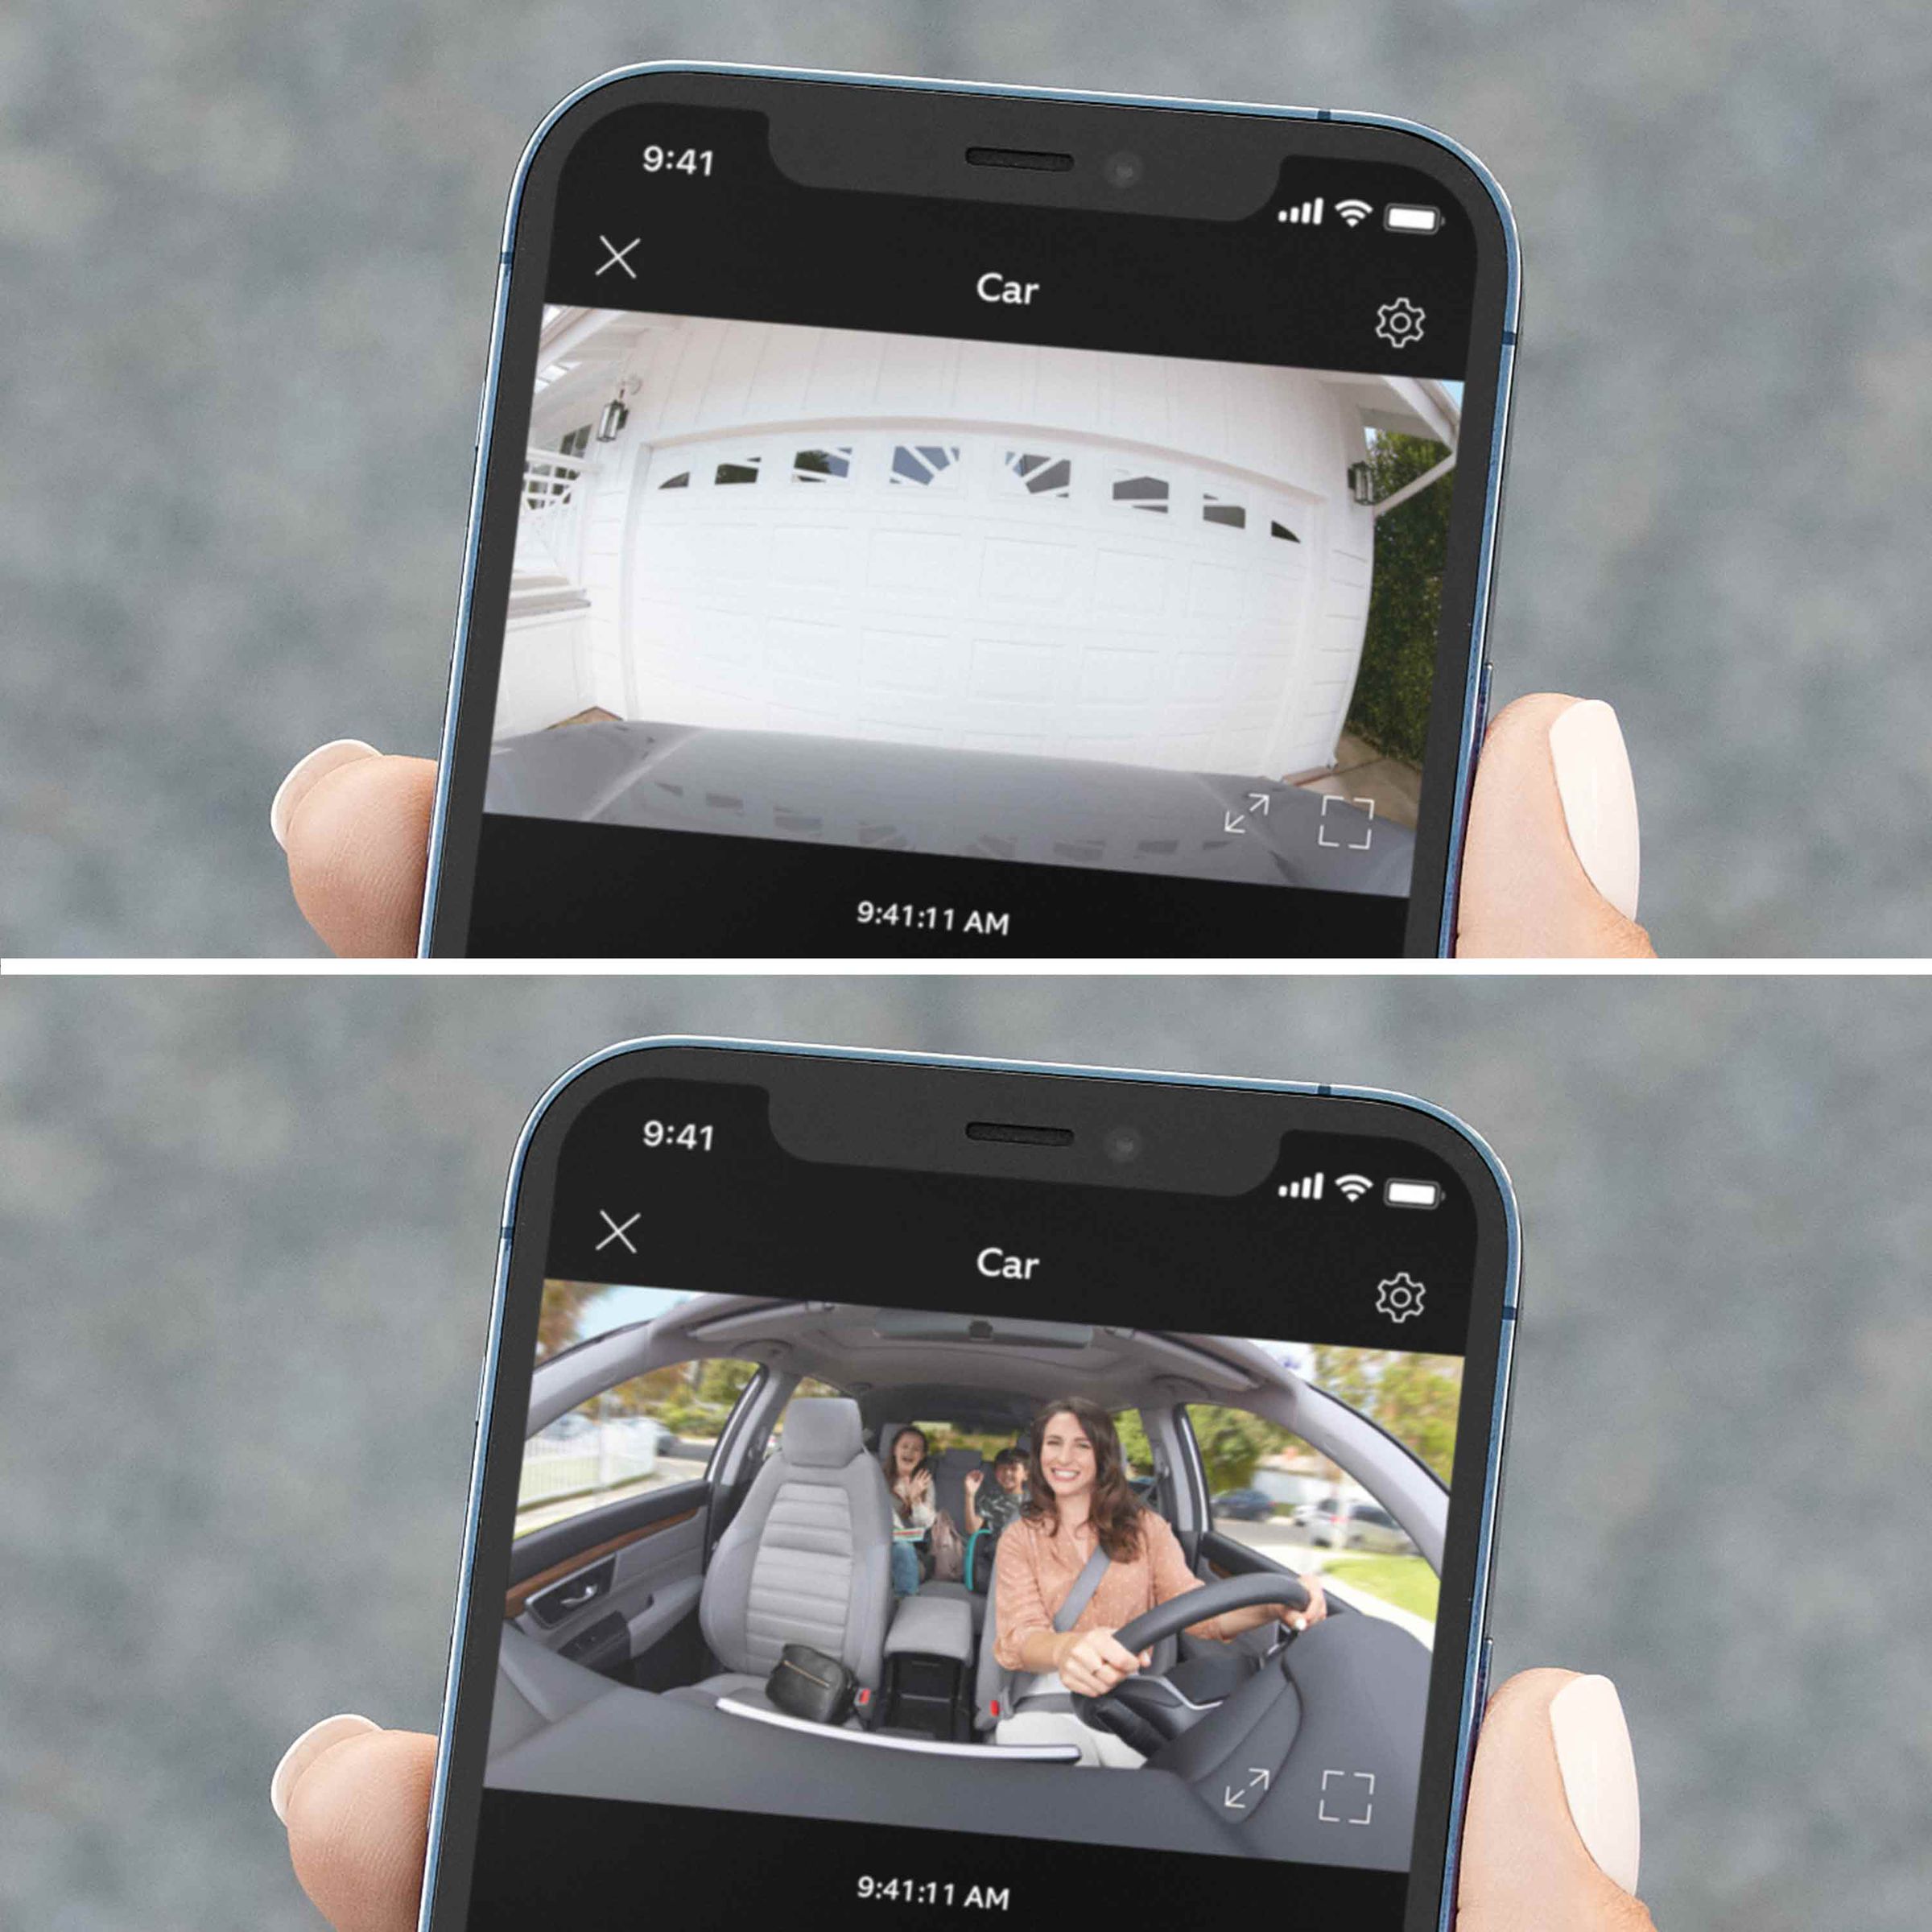 The Ring Car Cam works through the Ring app and shows you two views, one from the front-facing camera and one from the interior-facing camera.